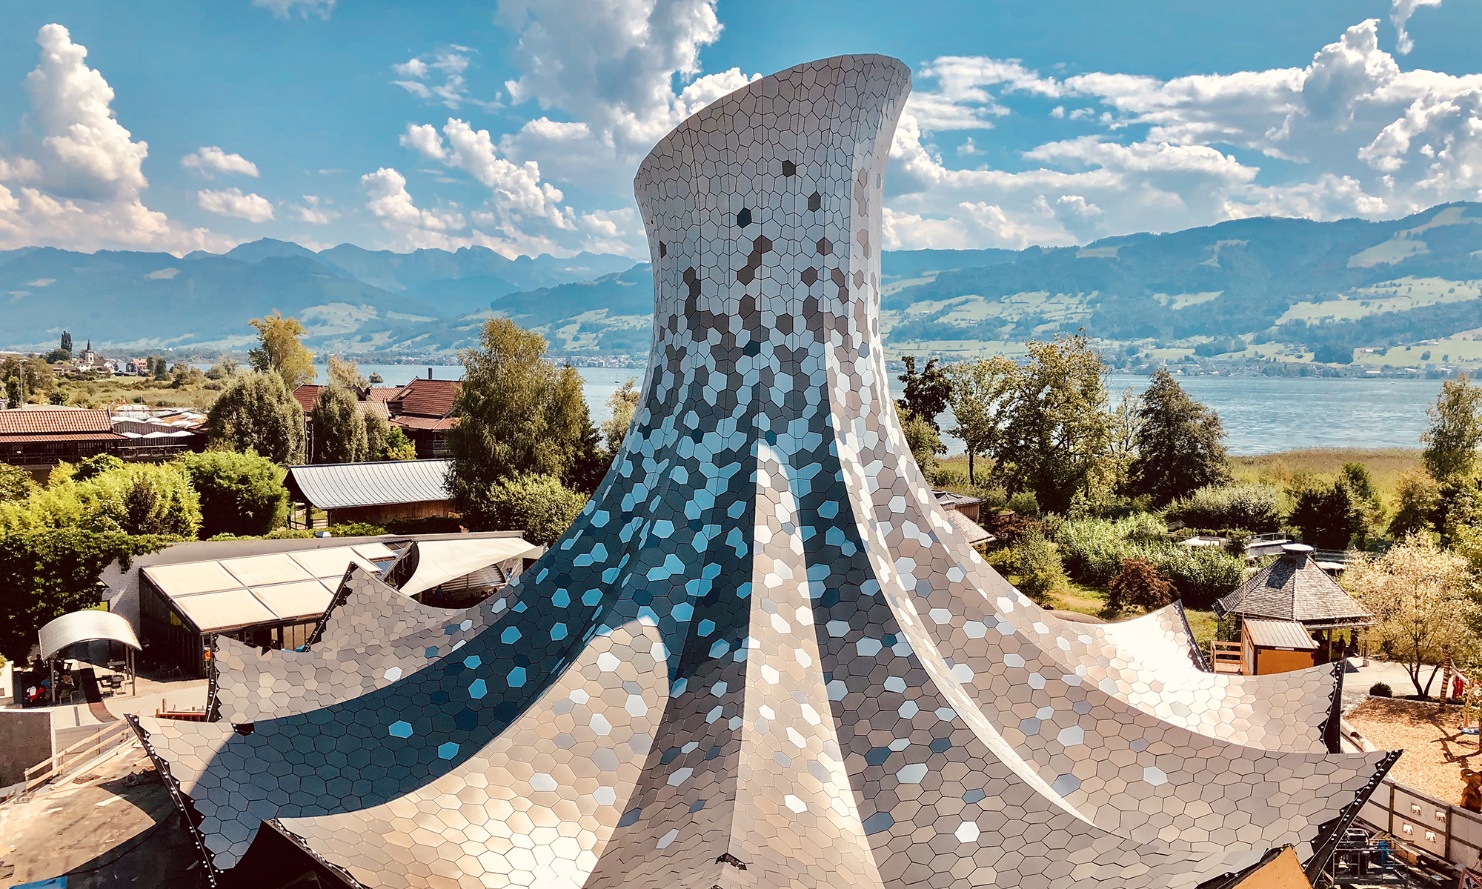 The striking magician’s hat timber structure stands at the heart of the children’s zoo and can be seen from far and wide in the surrounding Rapperswil area.